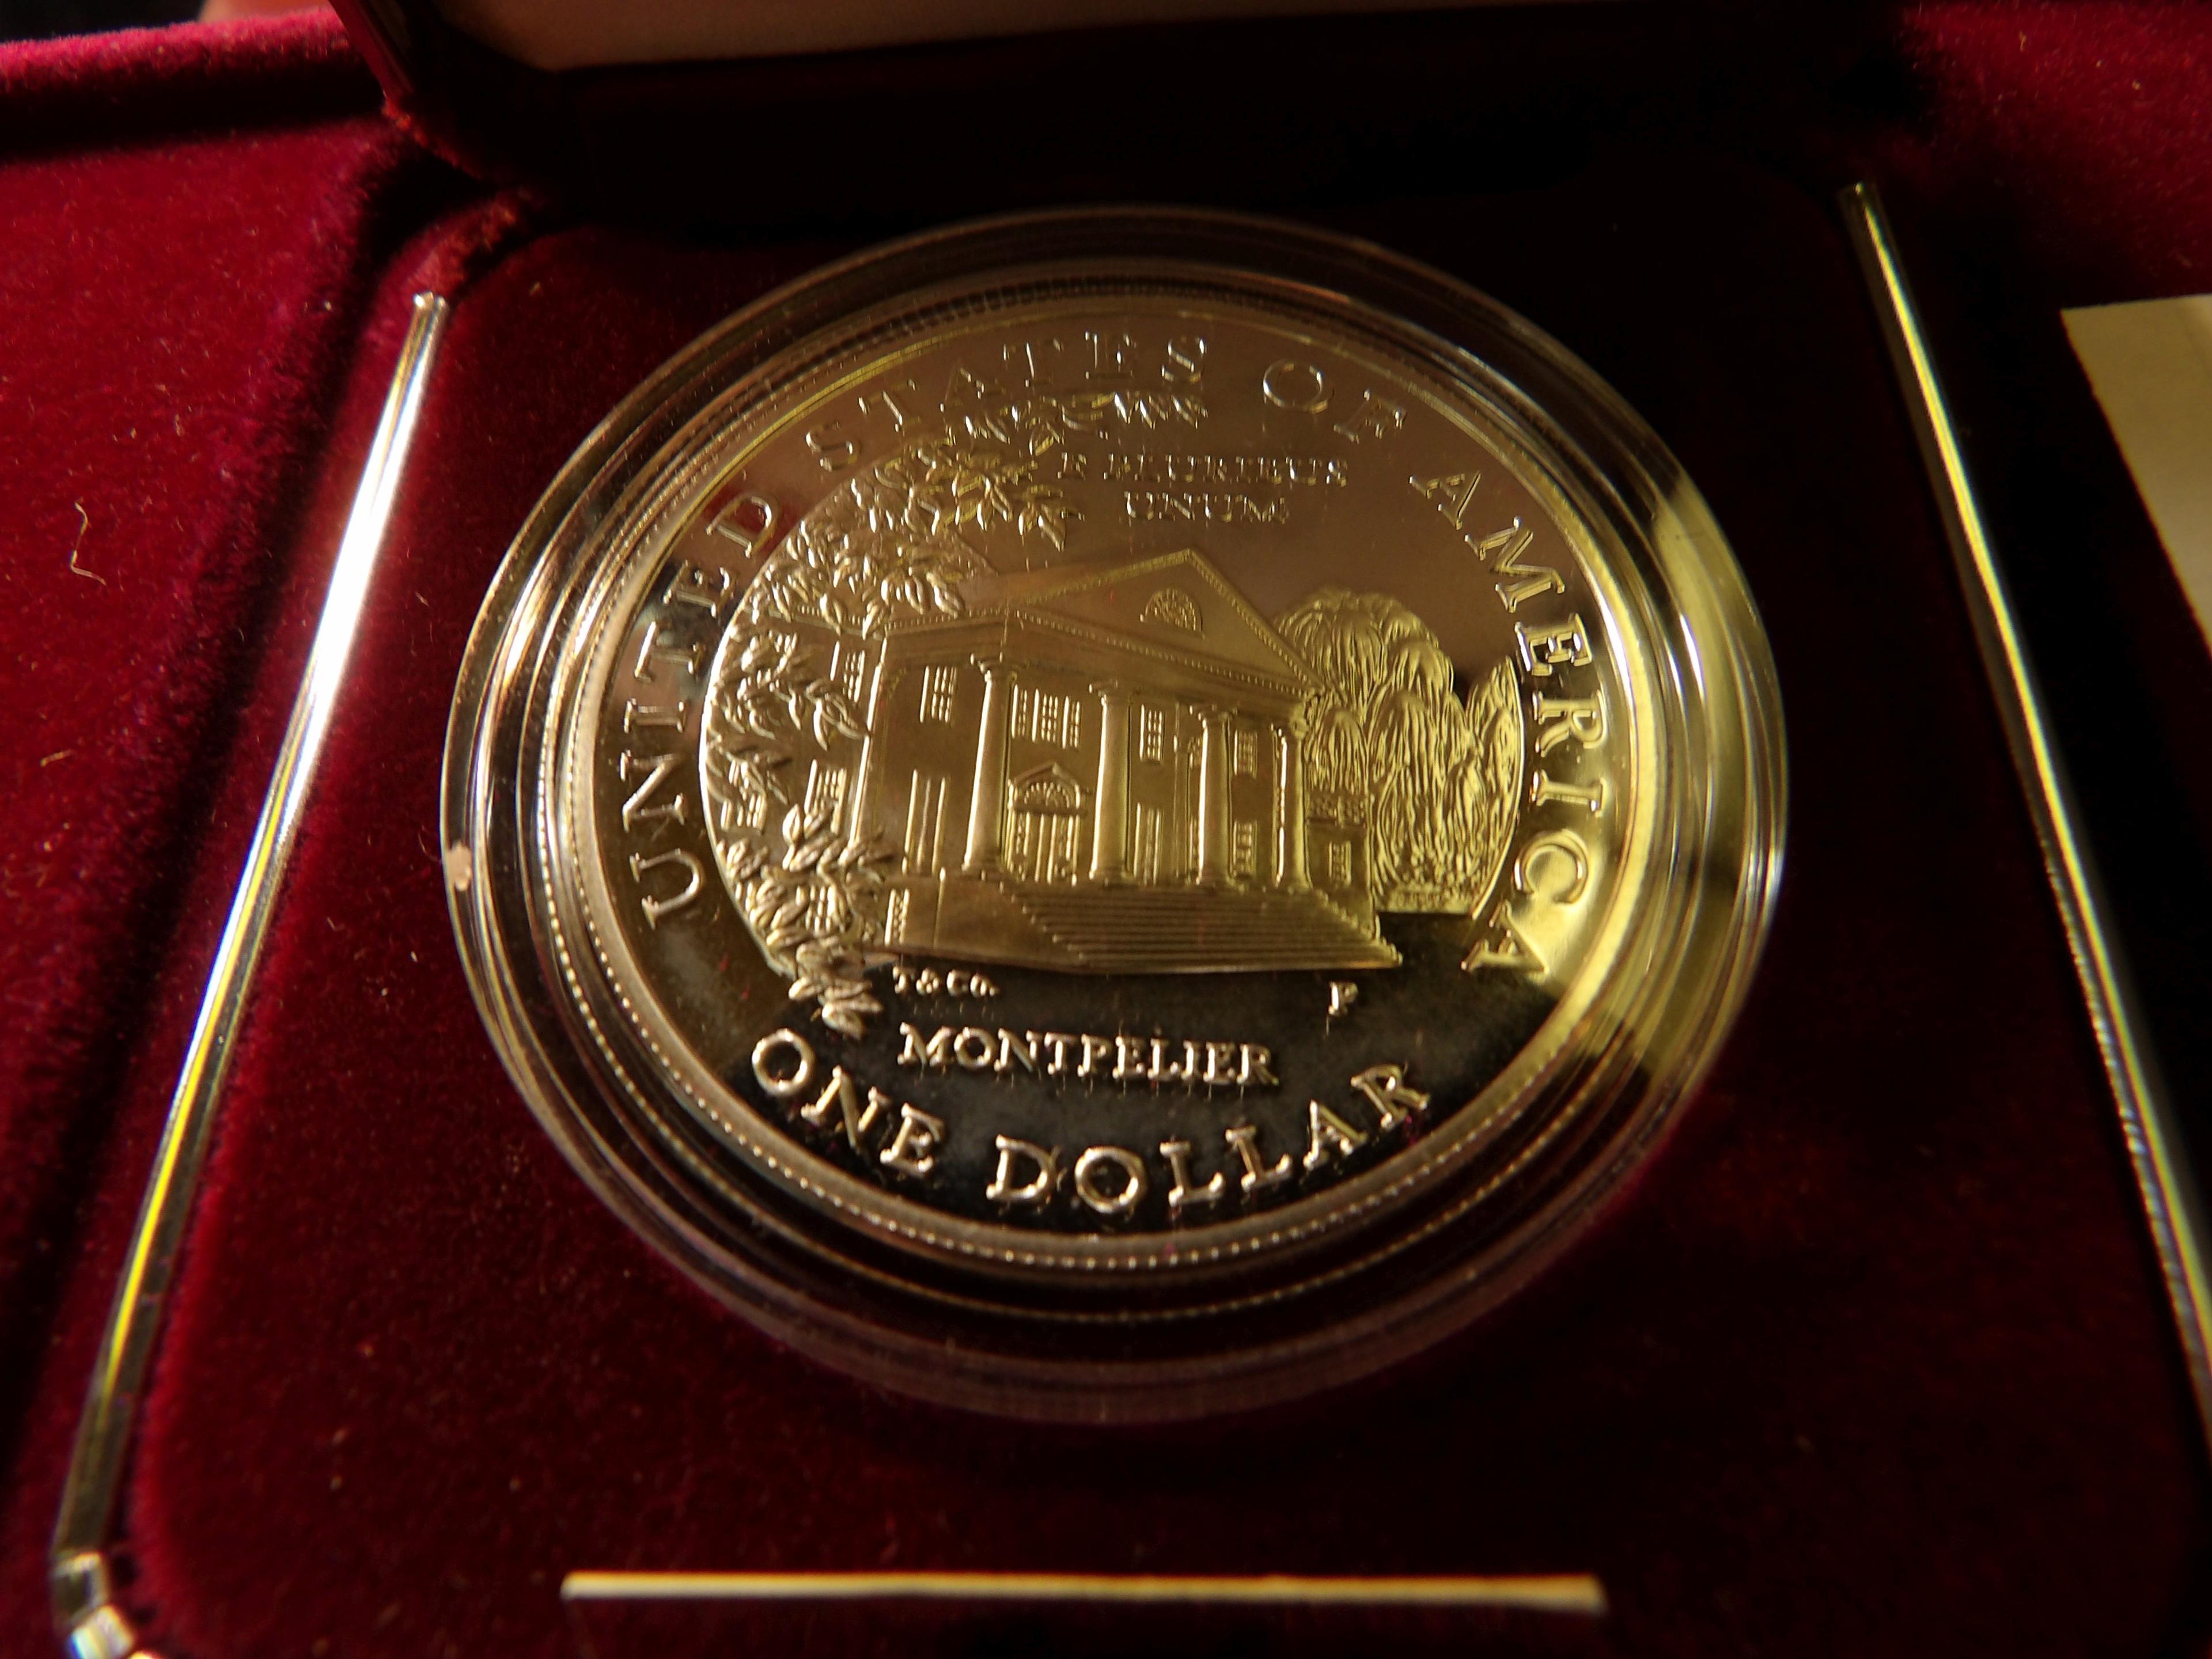 1999 Dolley Madison Proof Silver Dollar in box as issued.